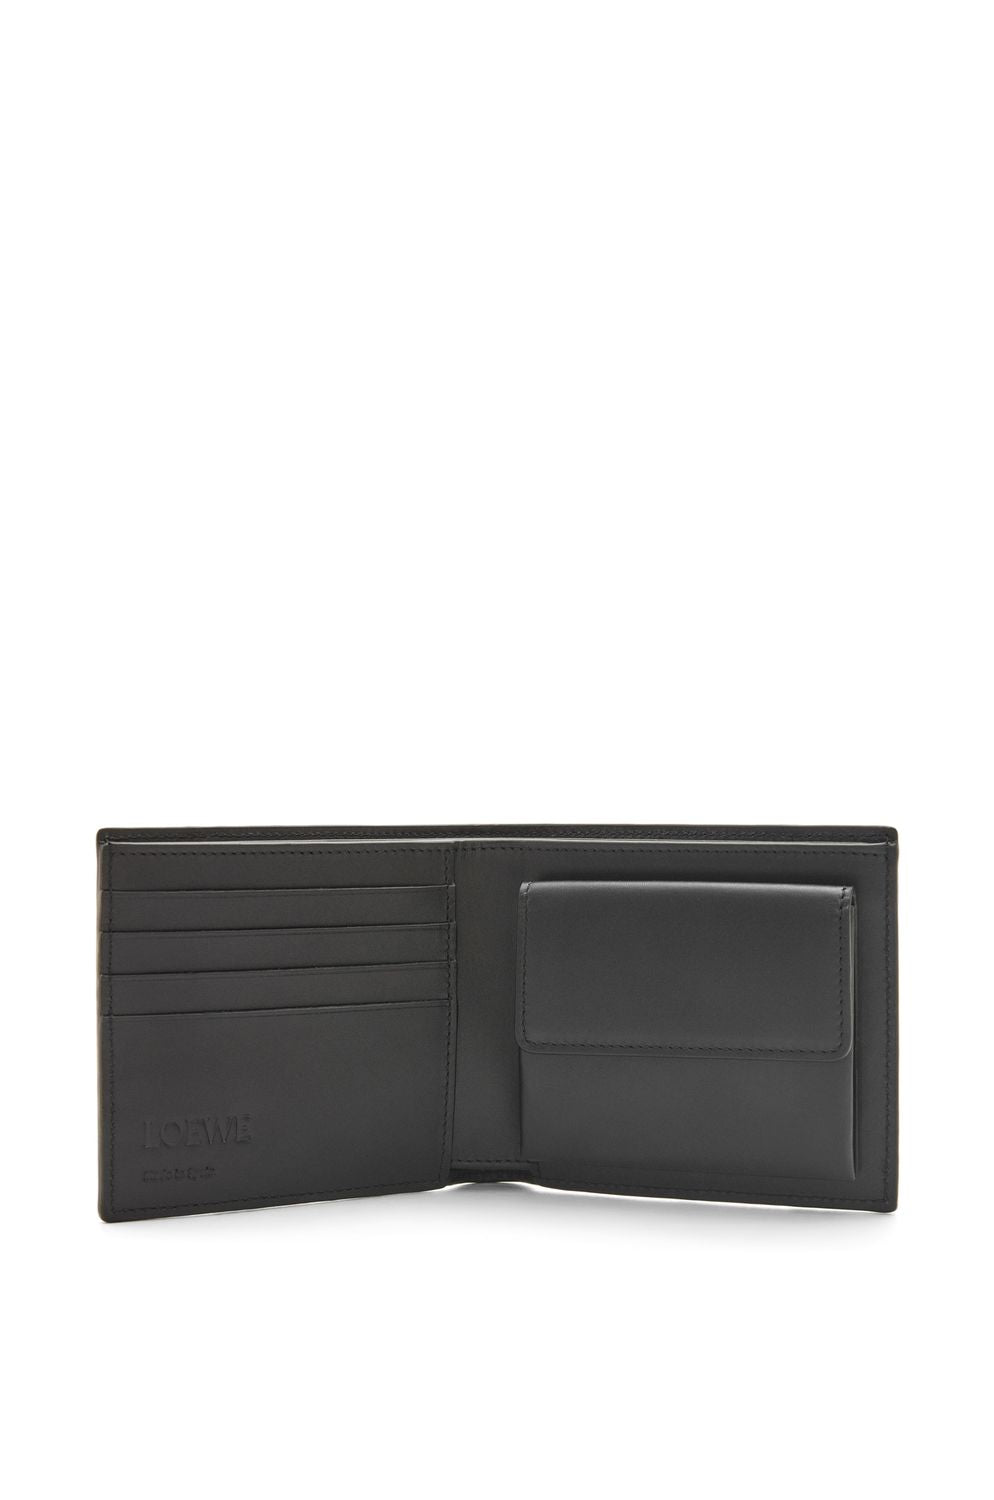 LOEWE PUZZLE EDGE BIFOLD COIN WALLET